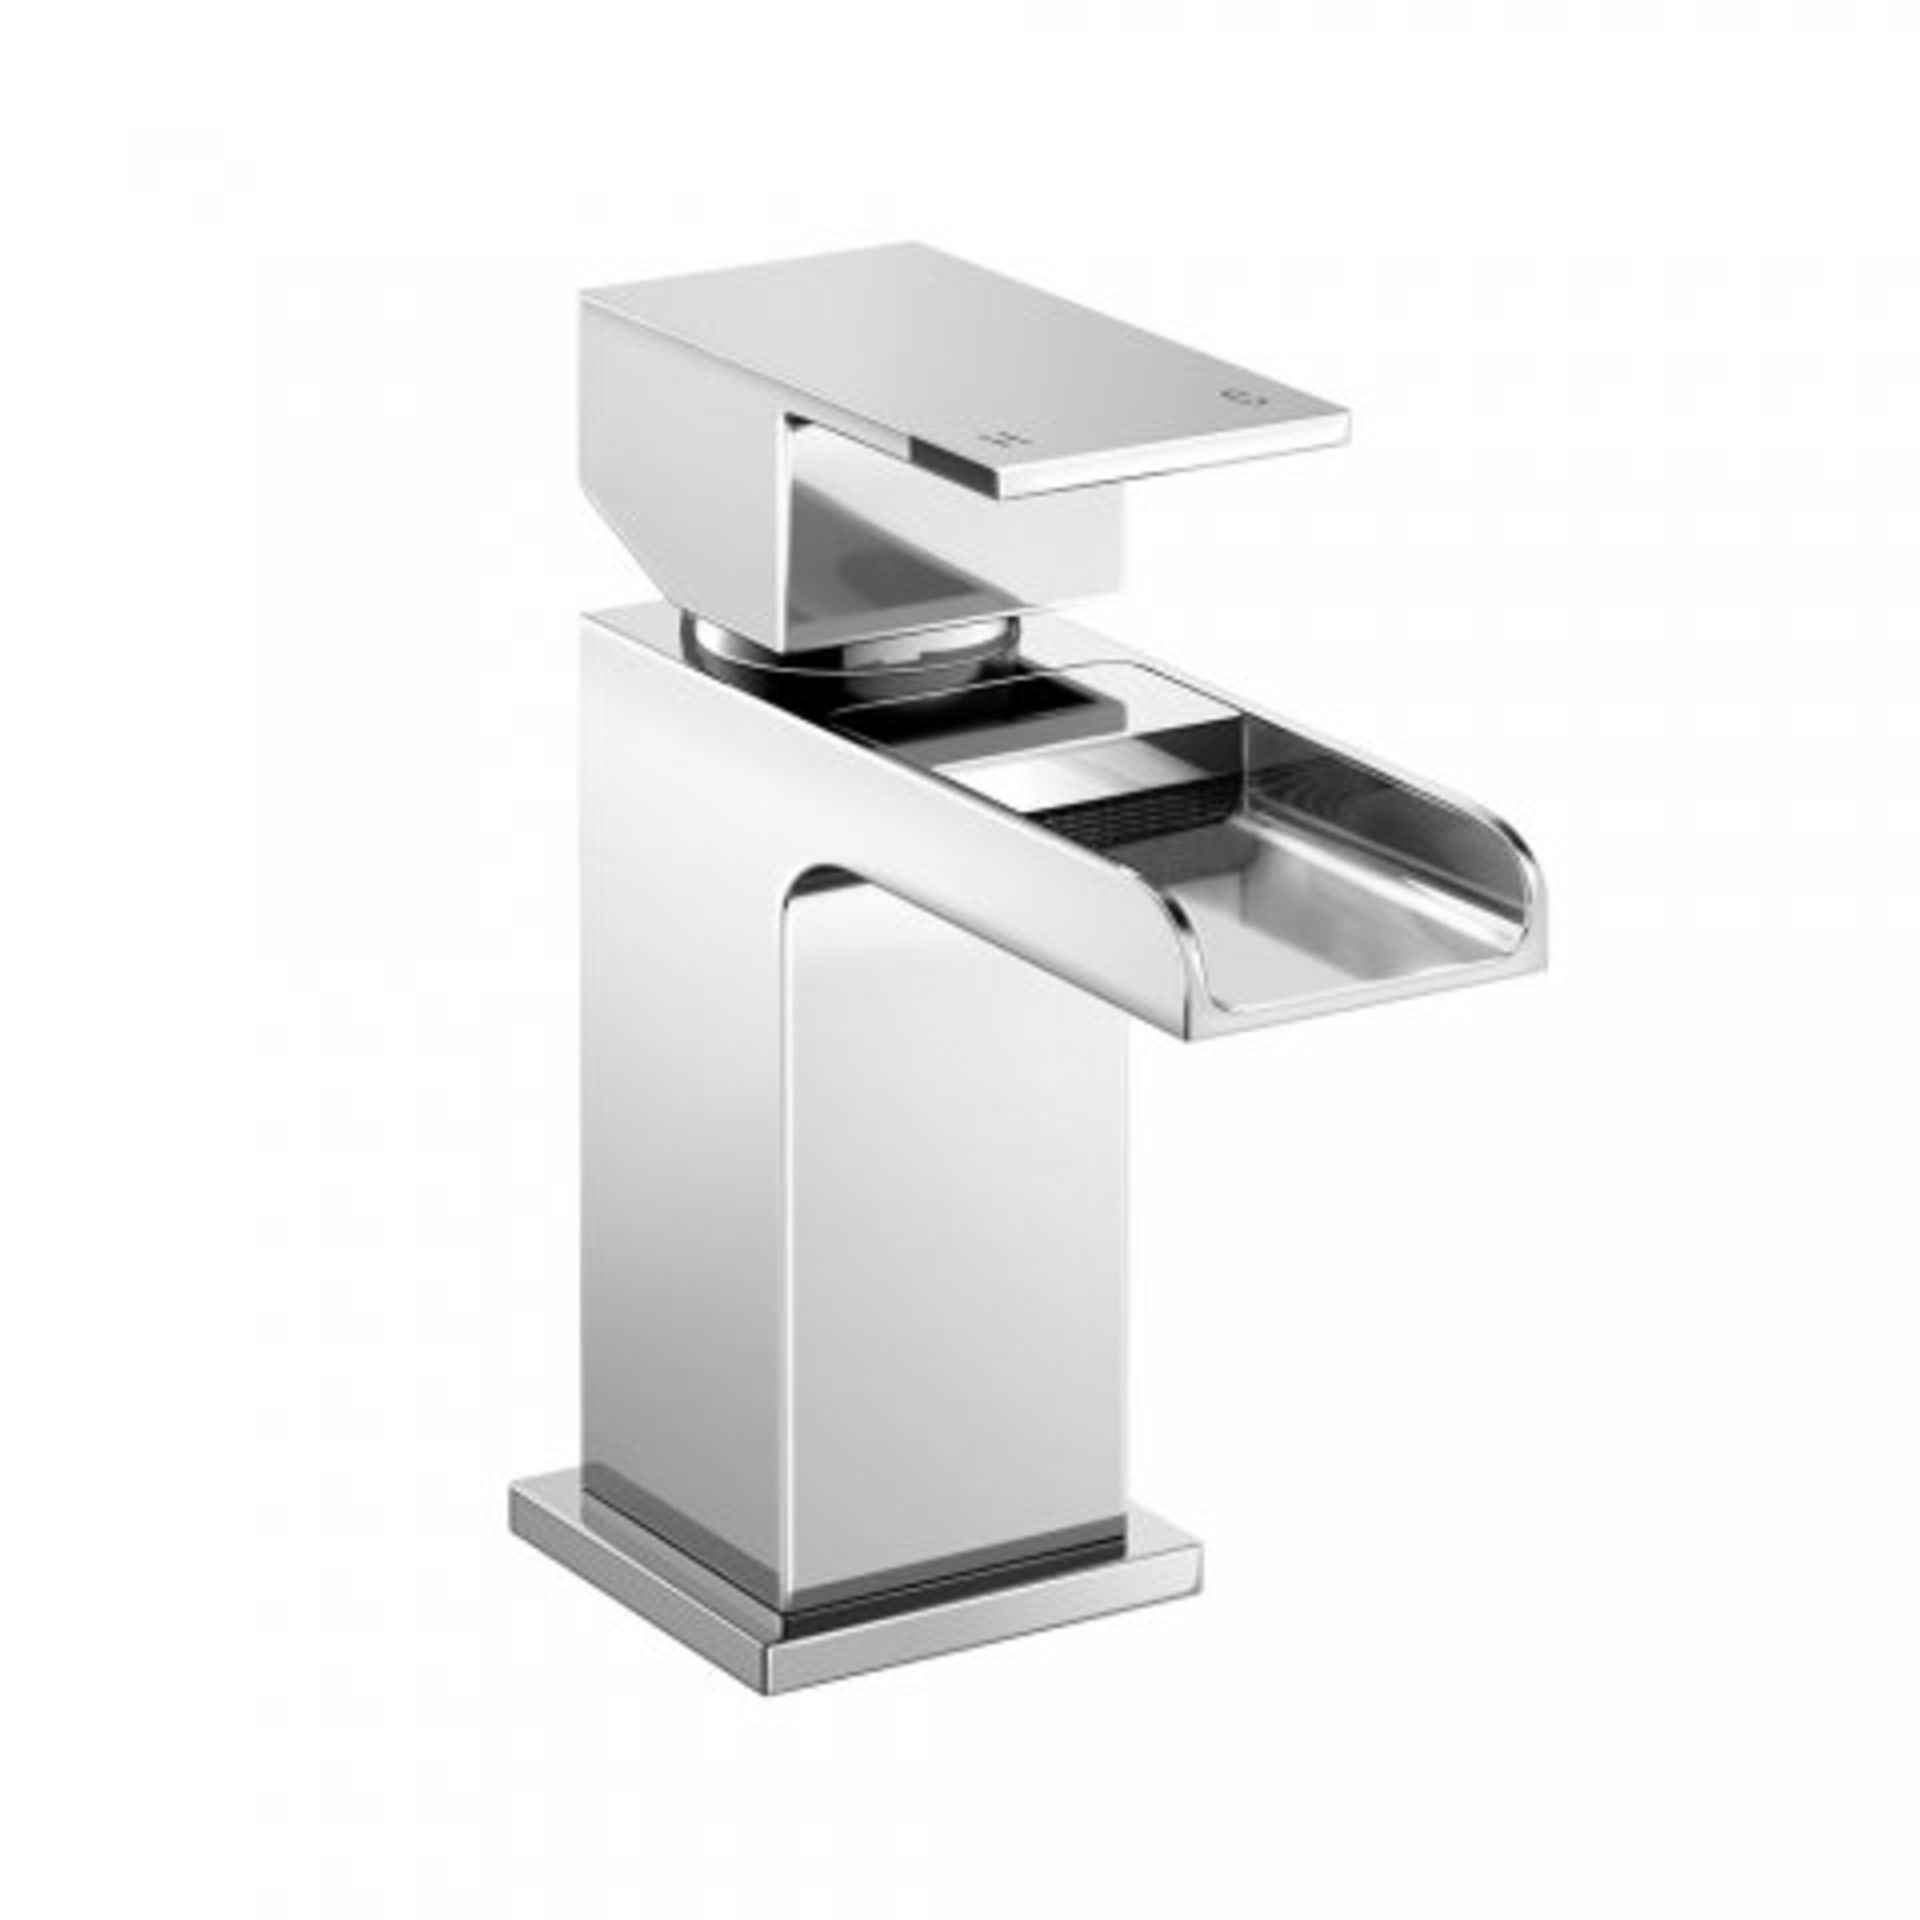 (FF1001) Niagra II Cloakroom Basin Mixer Tap Waterfall Feature Our range of waterfall taps add ... - Image 2 of 4